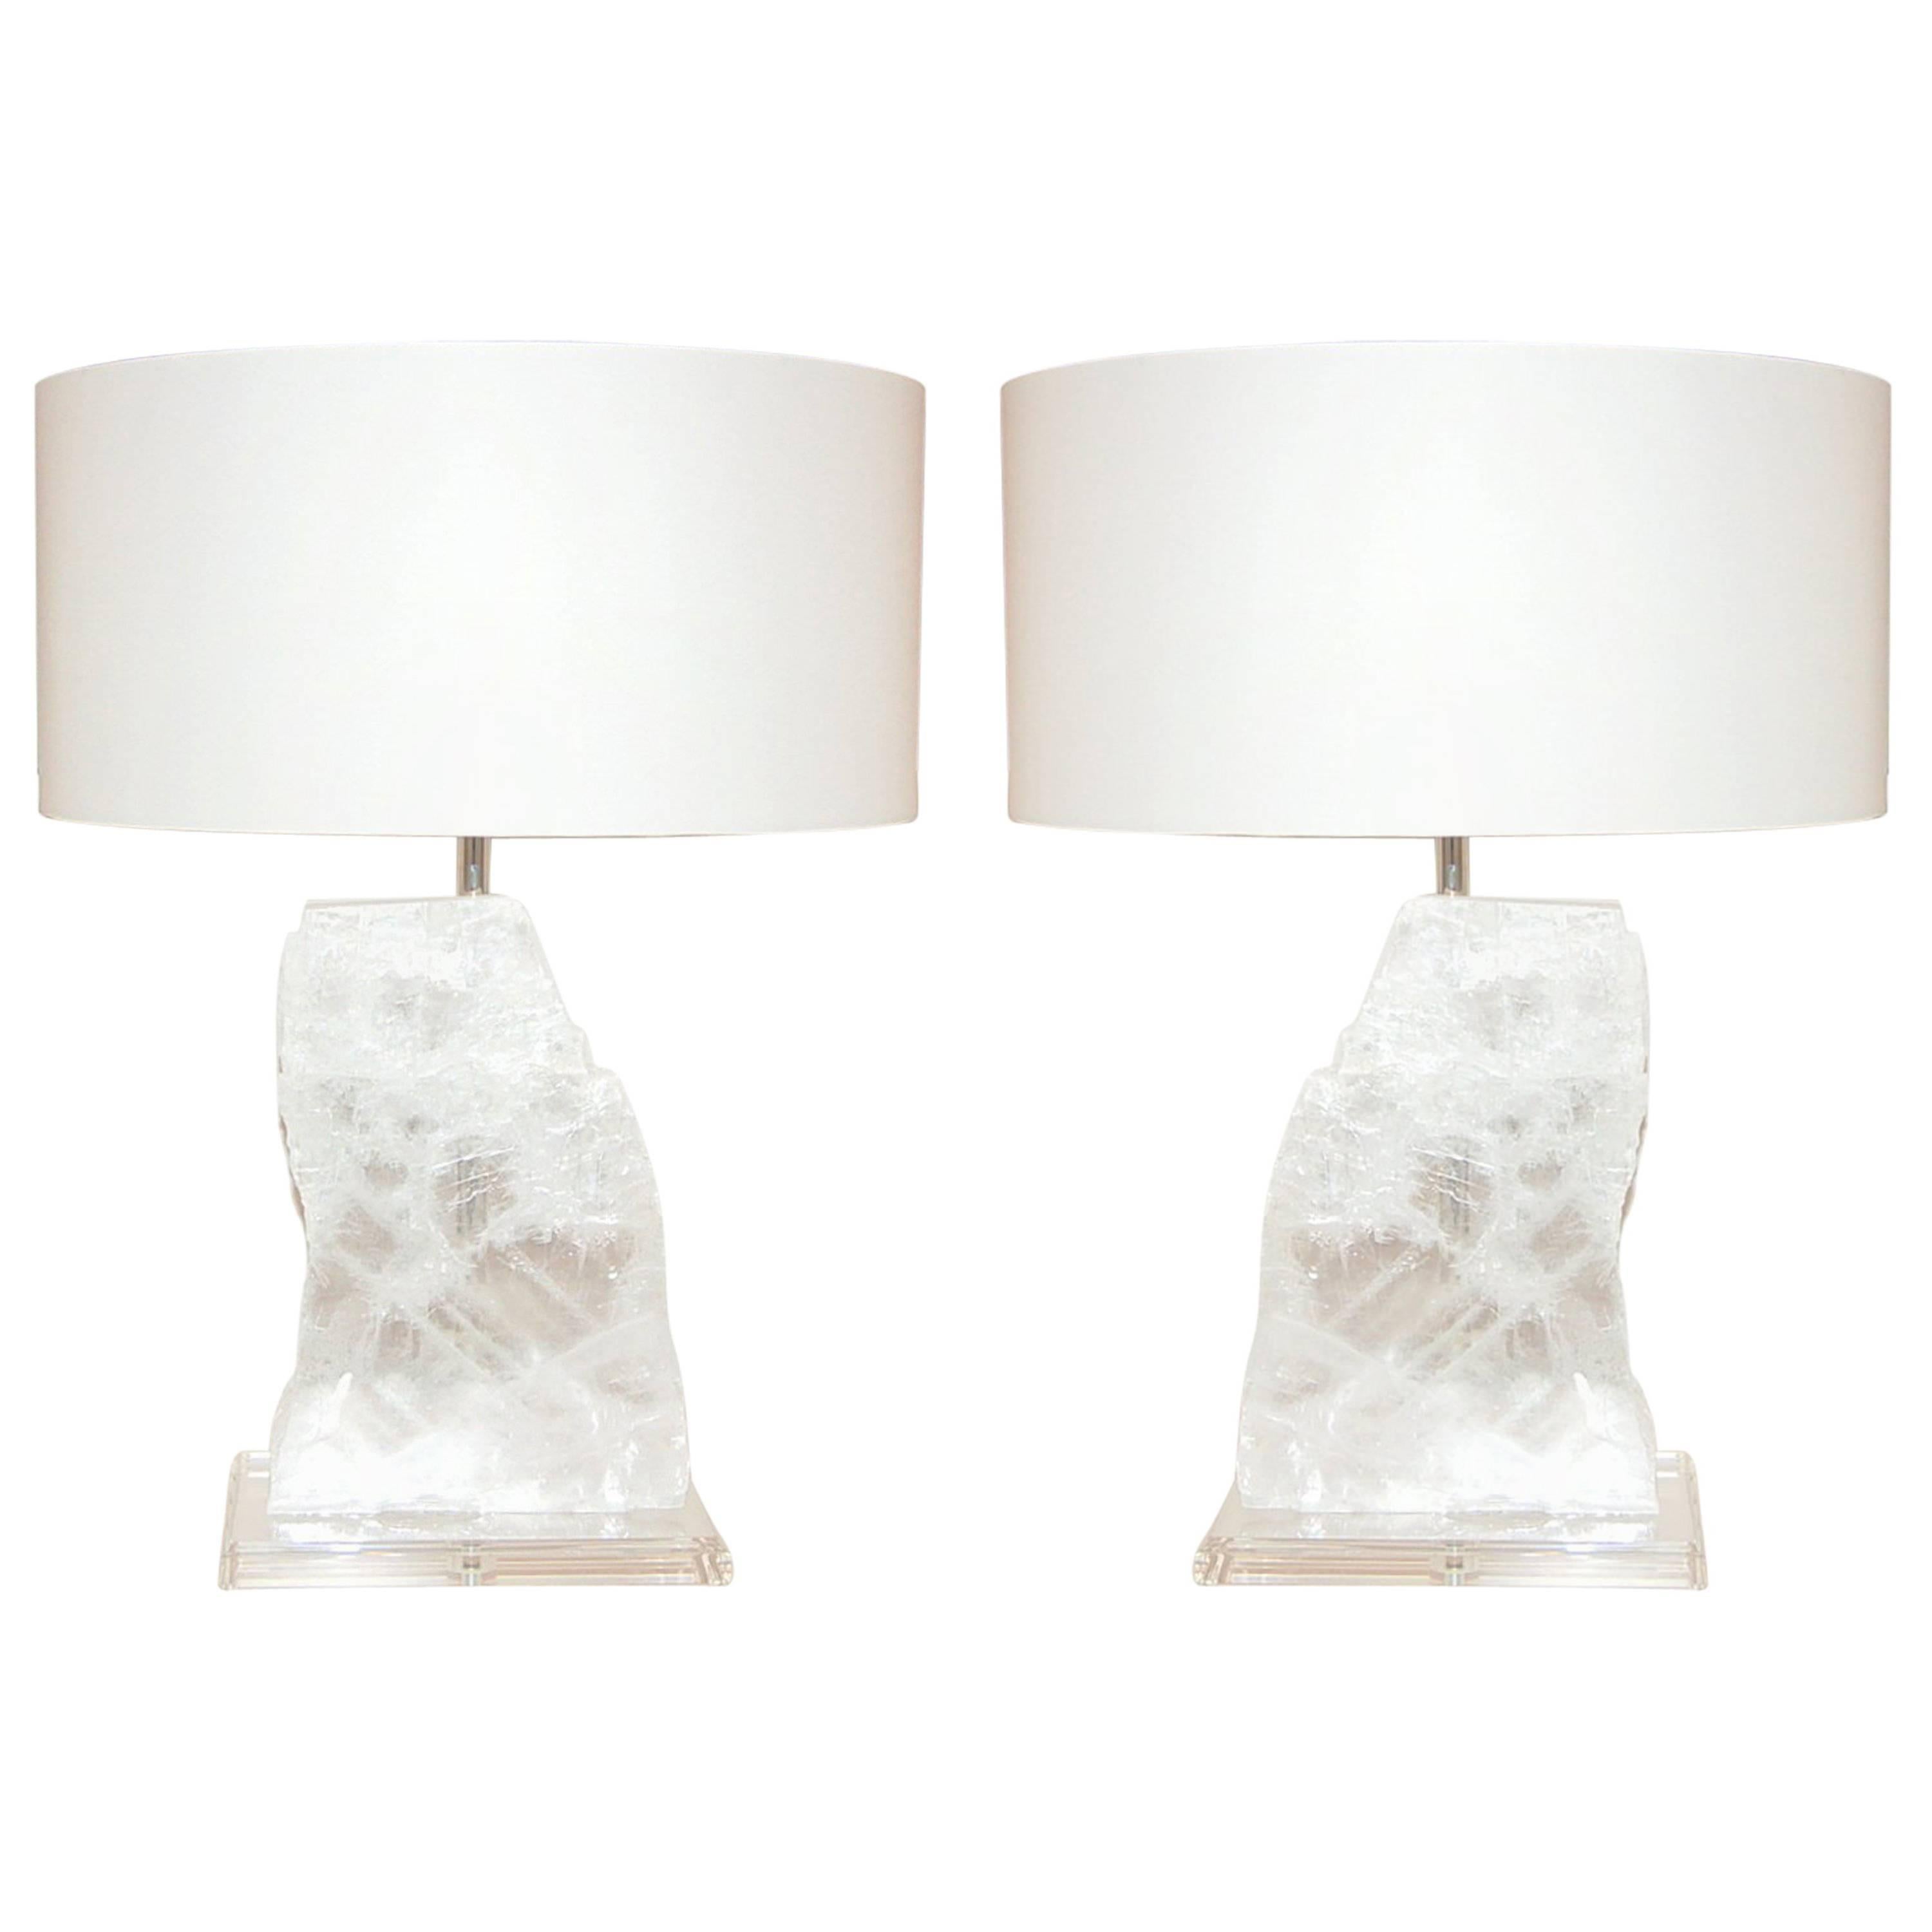 White Selenite Stone Table Lamps by Swank Lighting For Sale